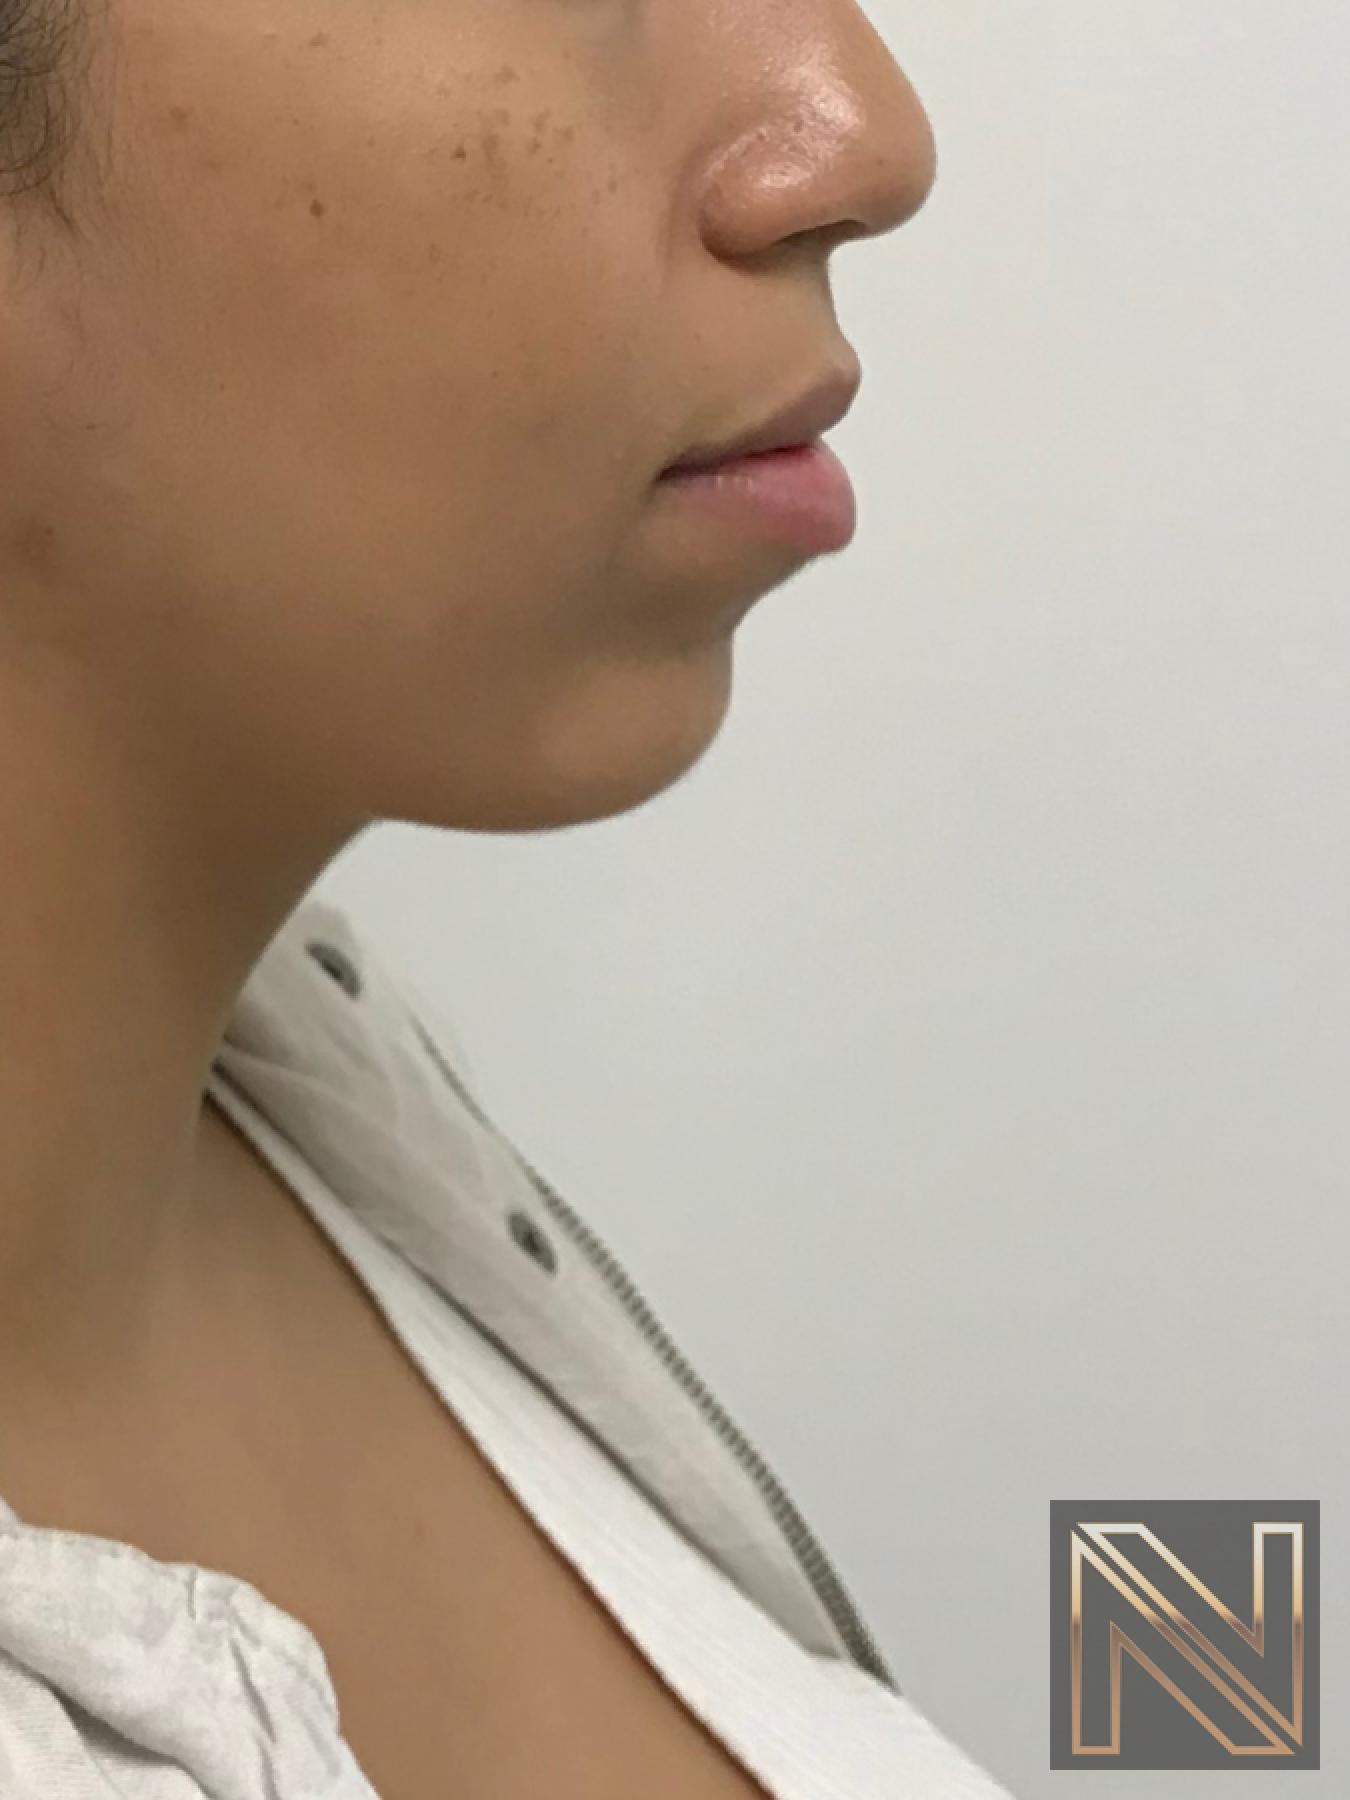 Chin Augmentation: Patient 1 - After 1